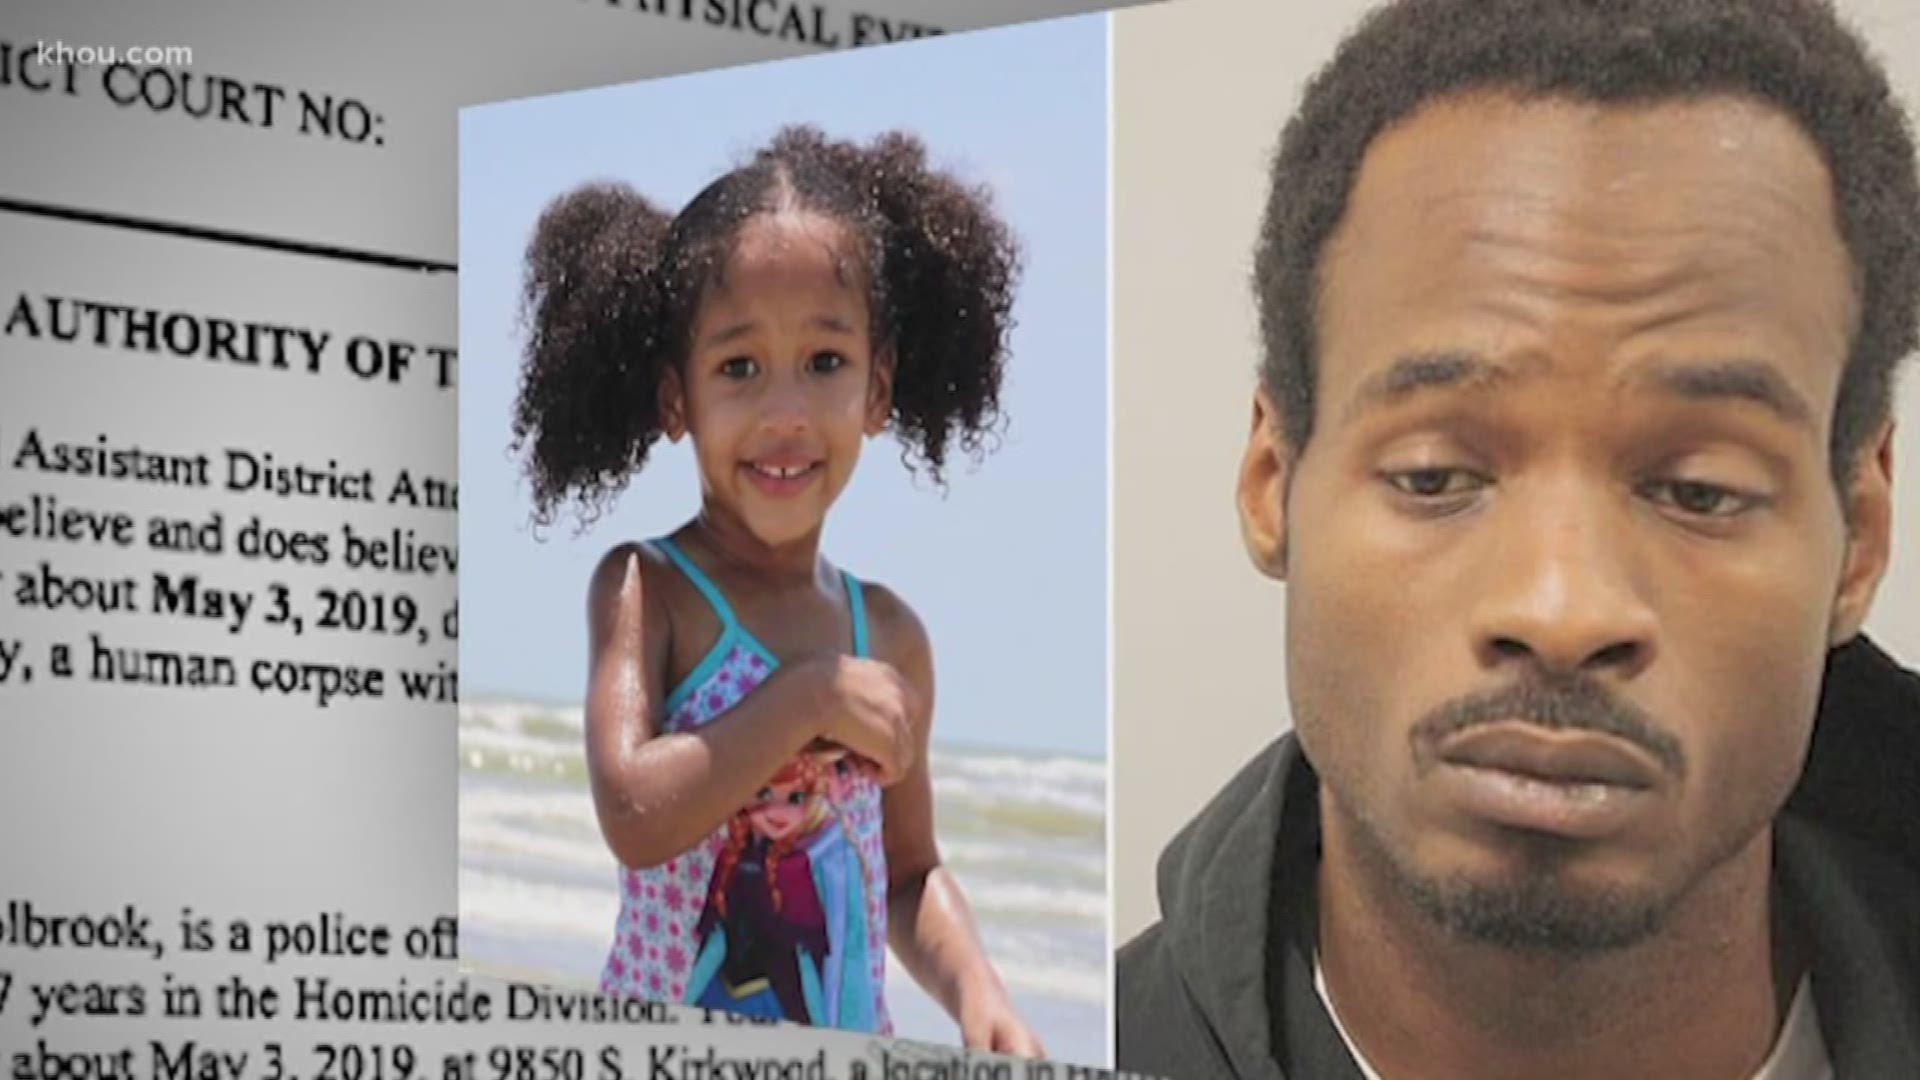 New court documents are putting together a disturbing puzzle of what may have happened to 4-year-old Maleah Davis.